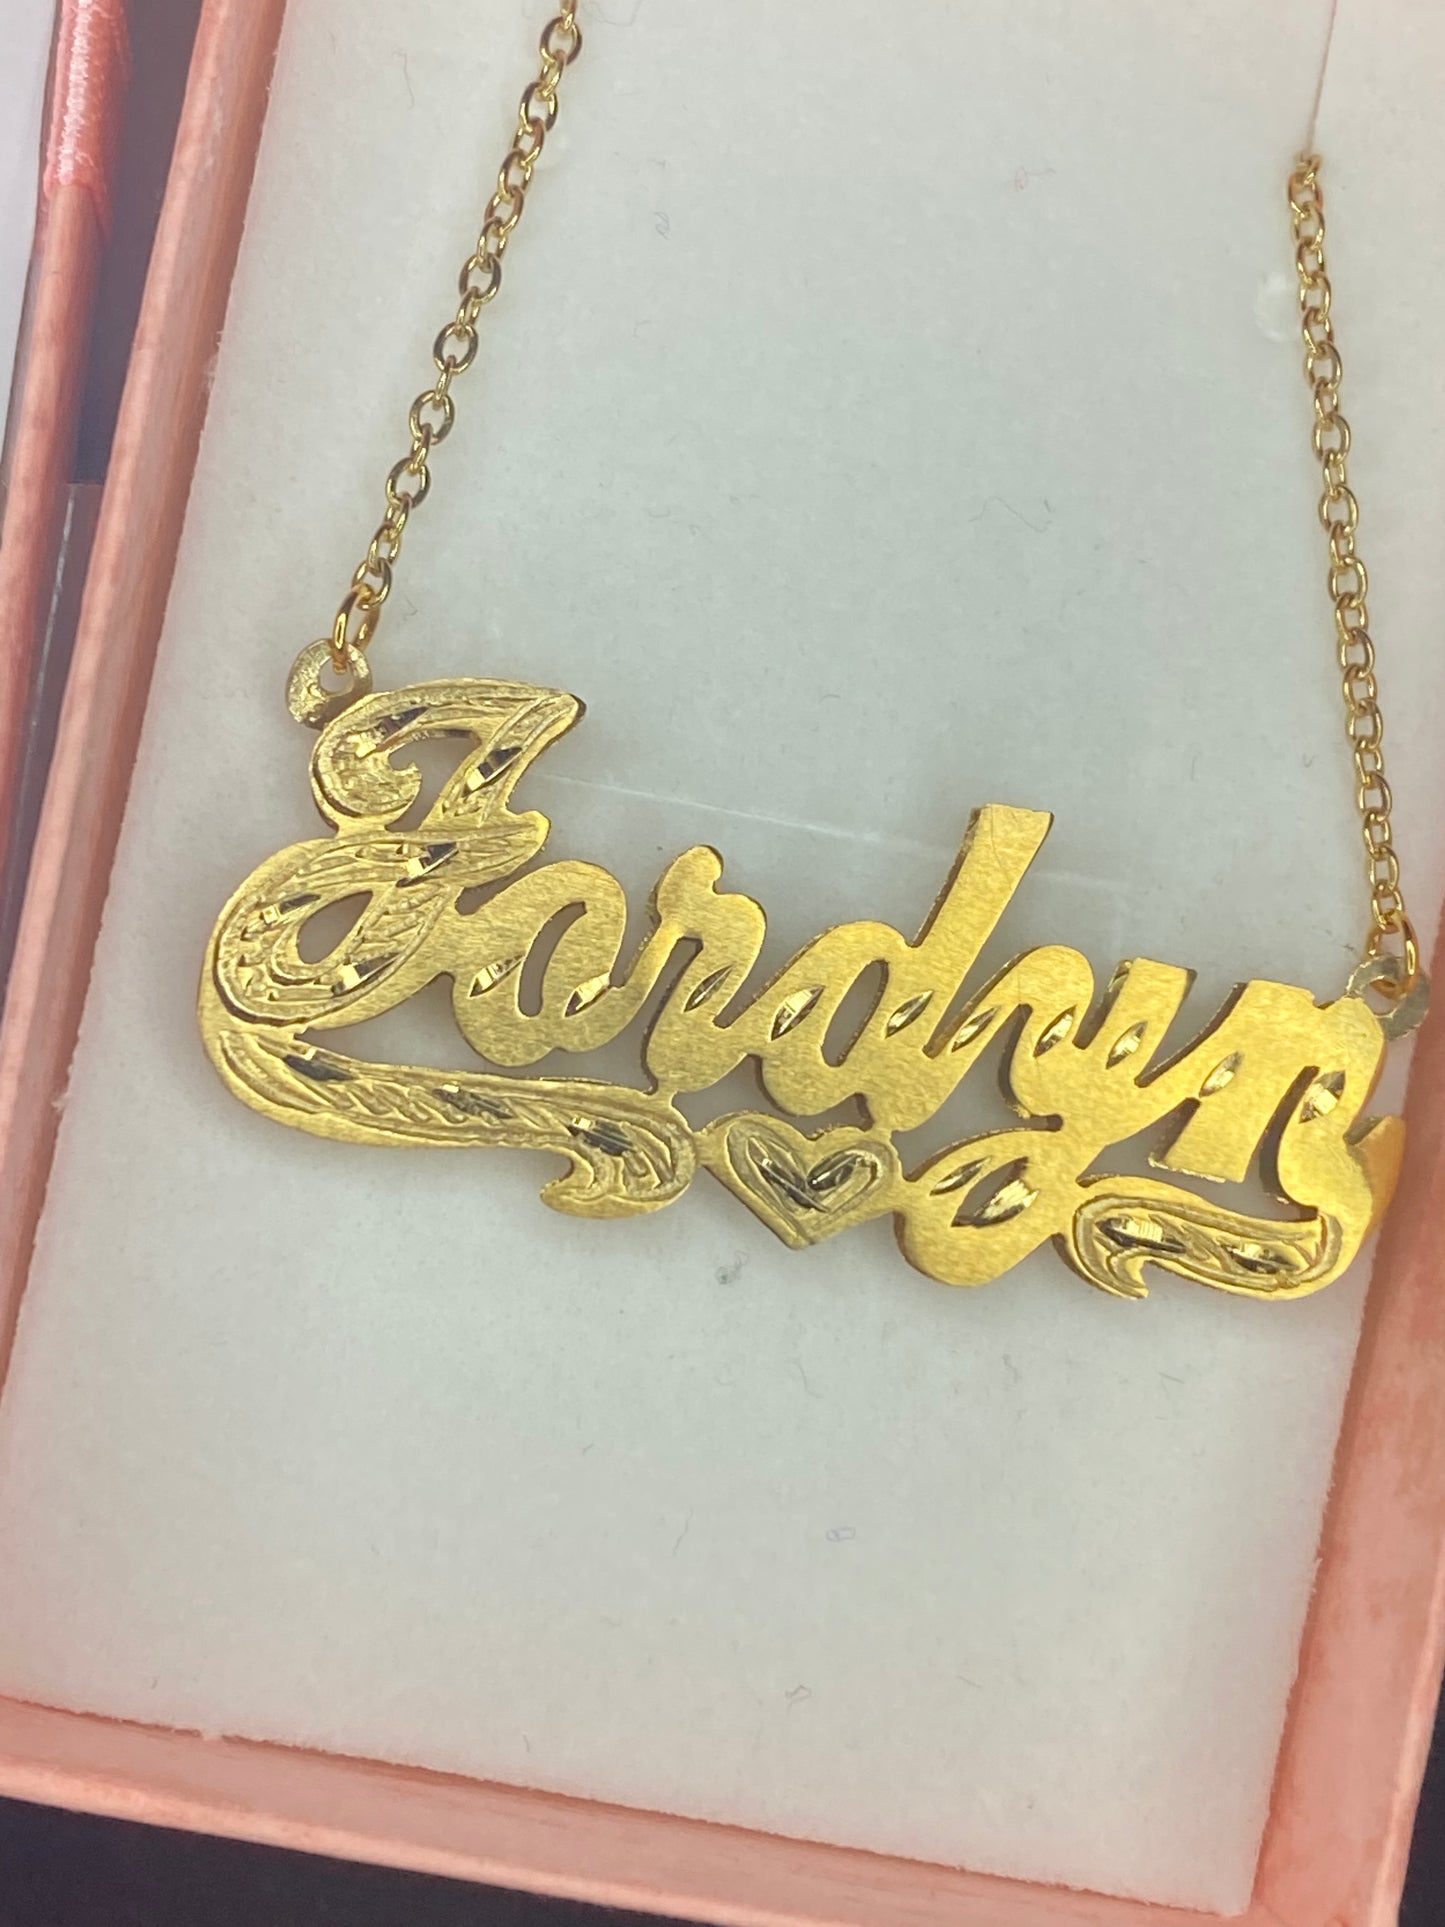 Beautiful 14K Gold Plated 3D Name Necklace - Customized Jewelry for Women - Free Personalization - Great for Birthdays, Anniversaries, and Valentine's Day